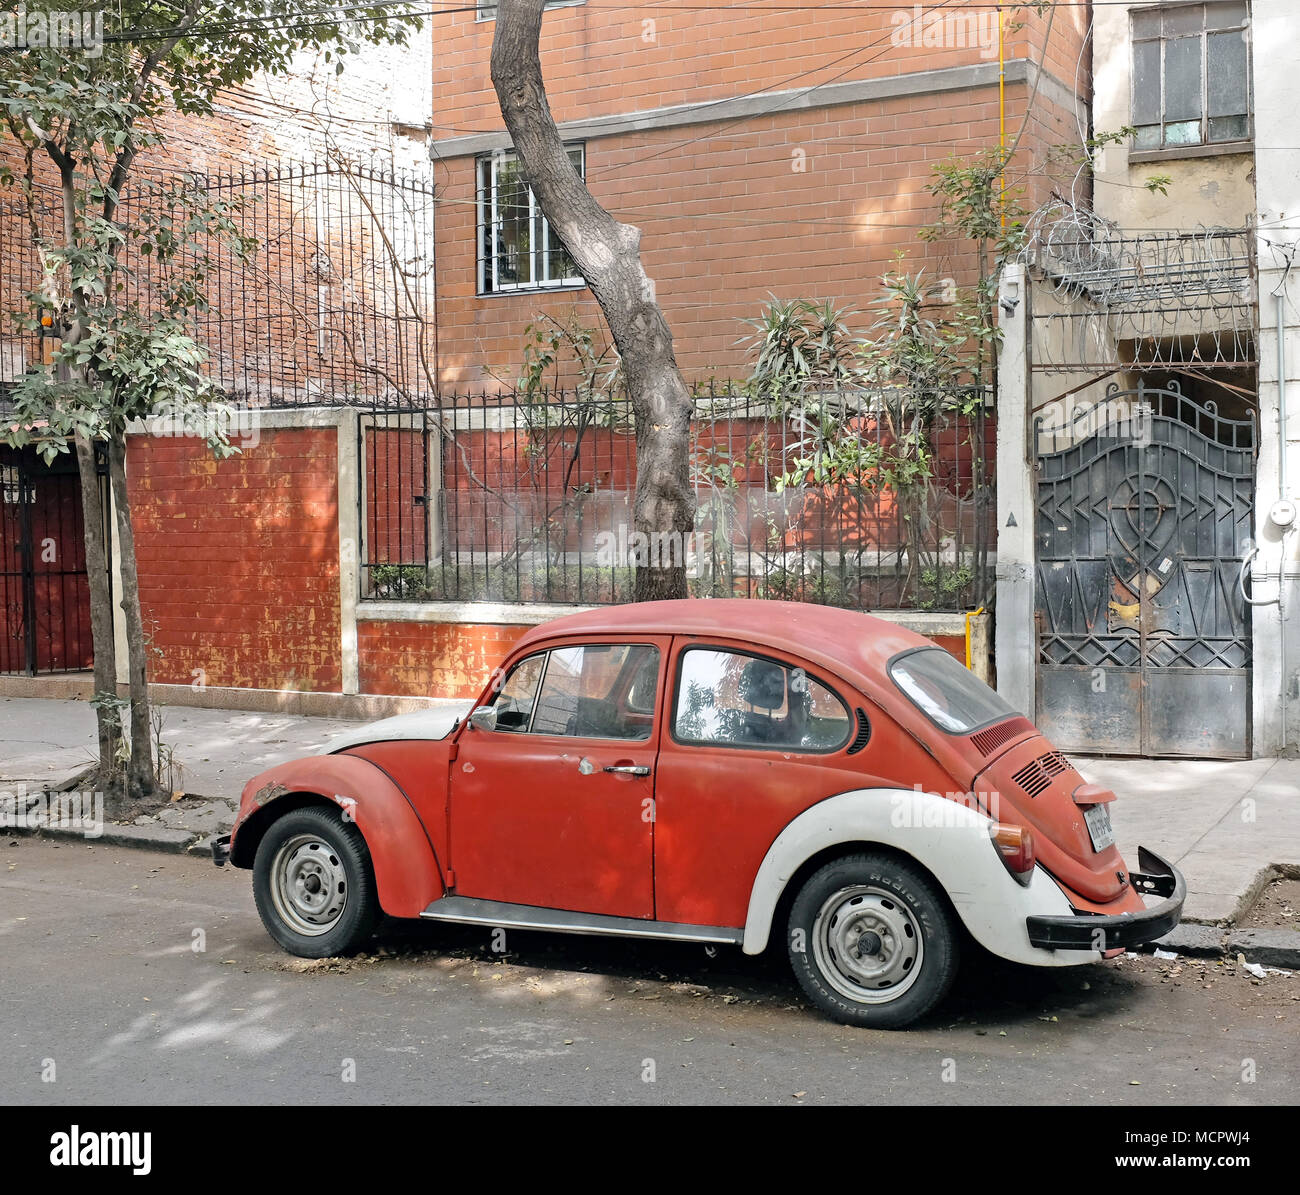 An orange and white Volkswagen Beetle parked outside the beat poets landmark at 210 Orizaba in the La Roma neighborhood of Mexico City. Stock Photo